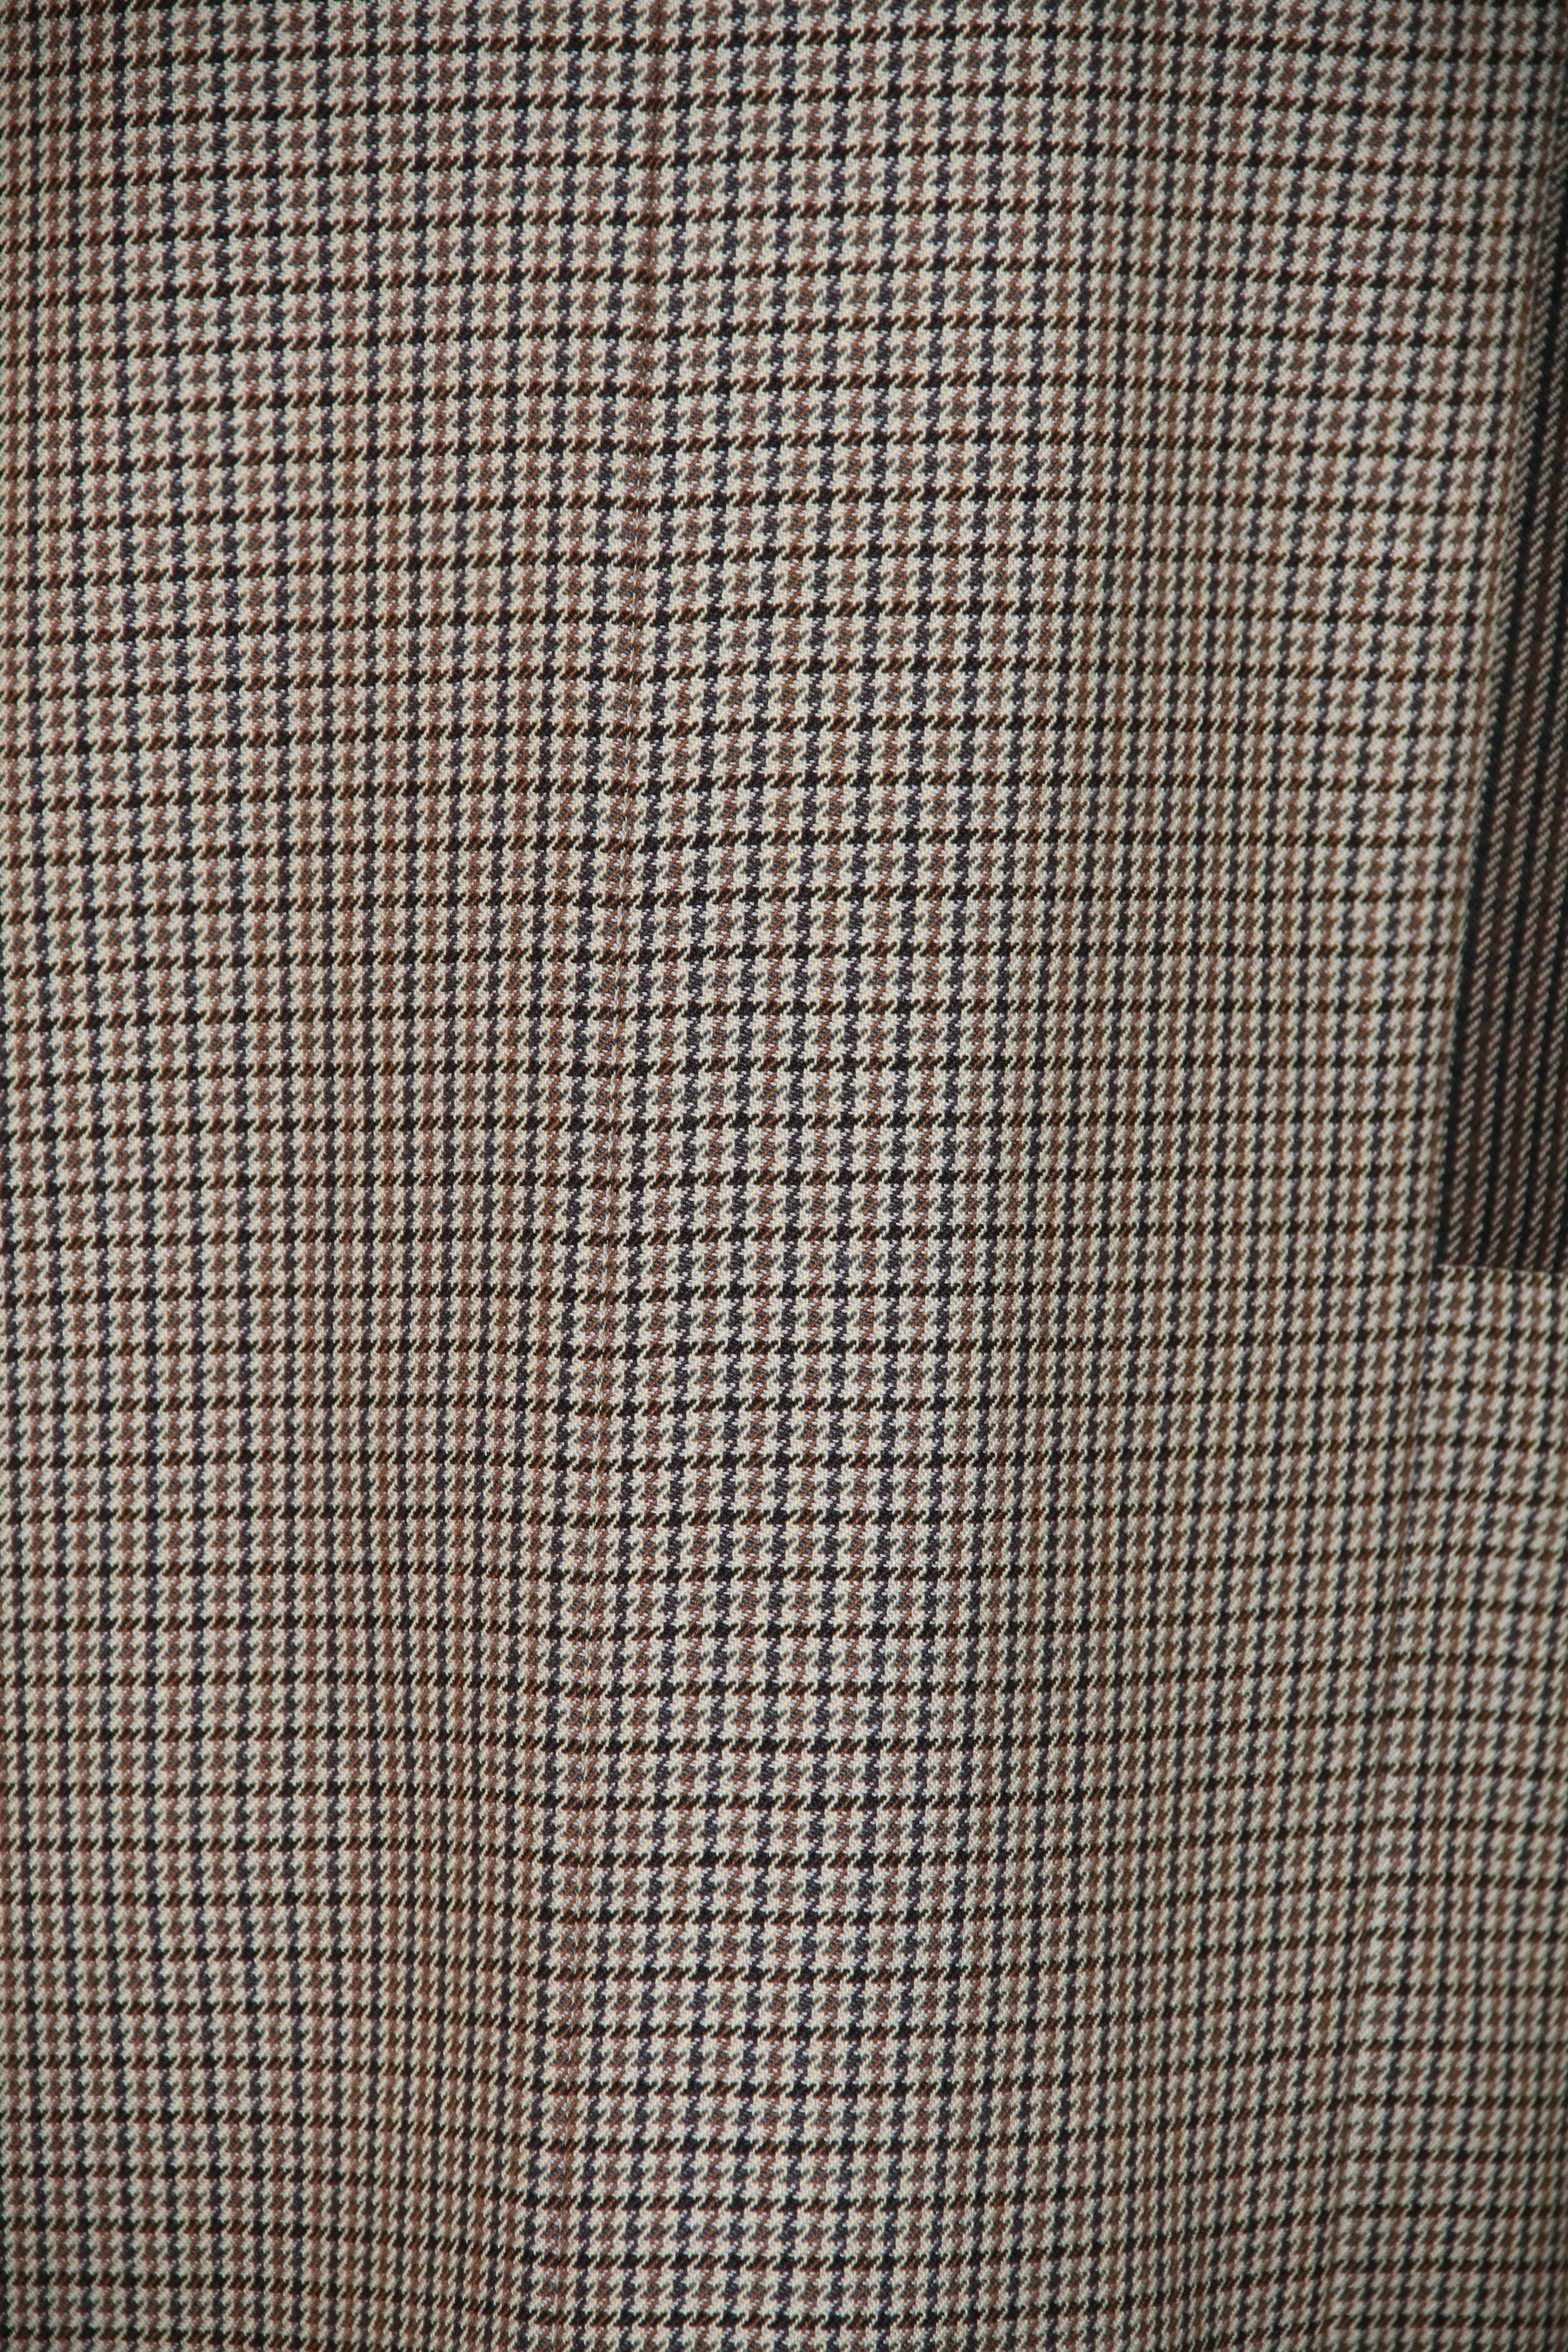 Céline Pre Fall 2011 Houndstooth Coat by Phoebe Philo 3